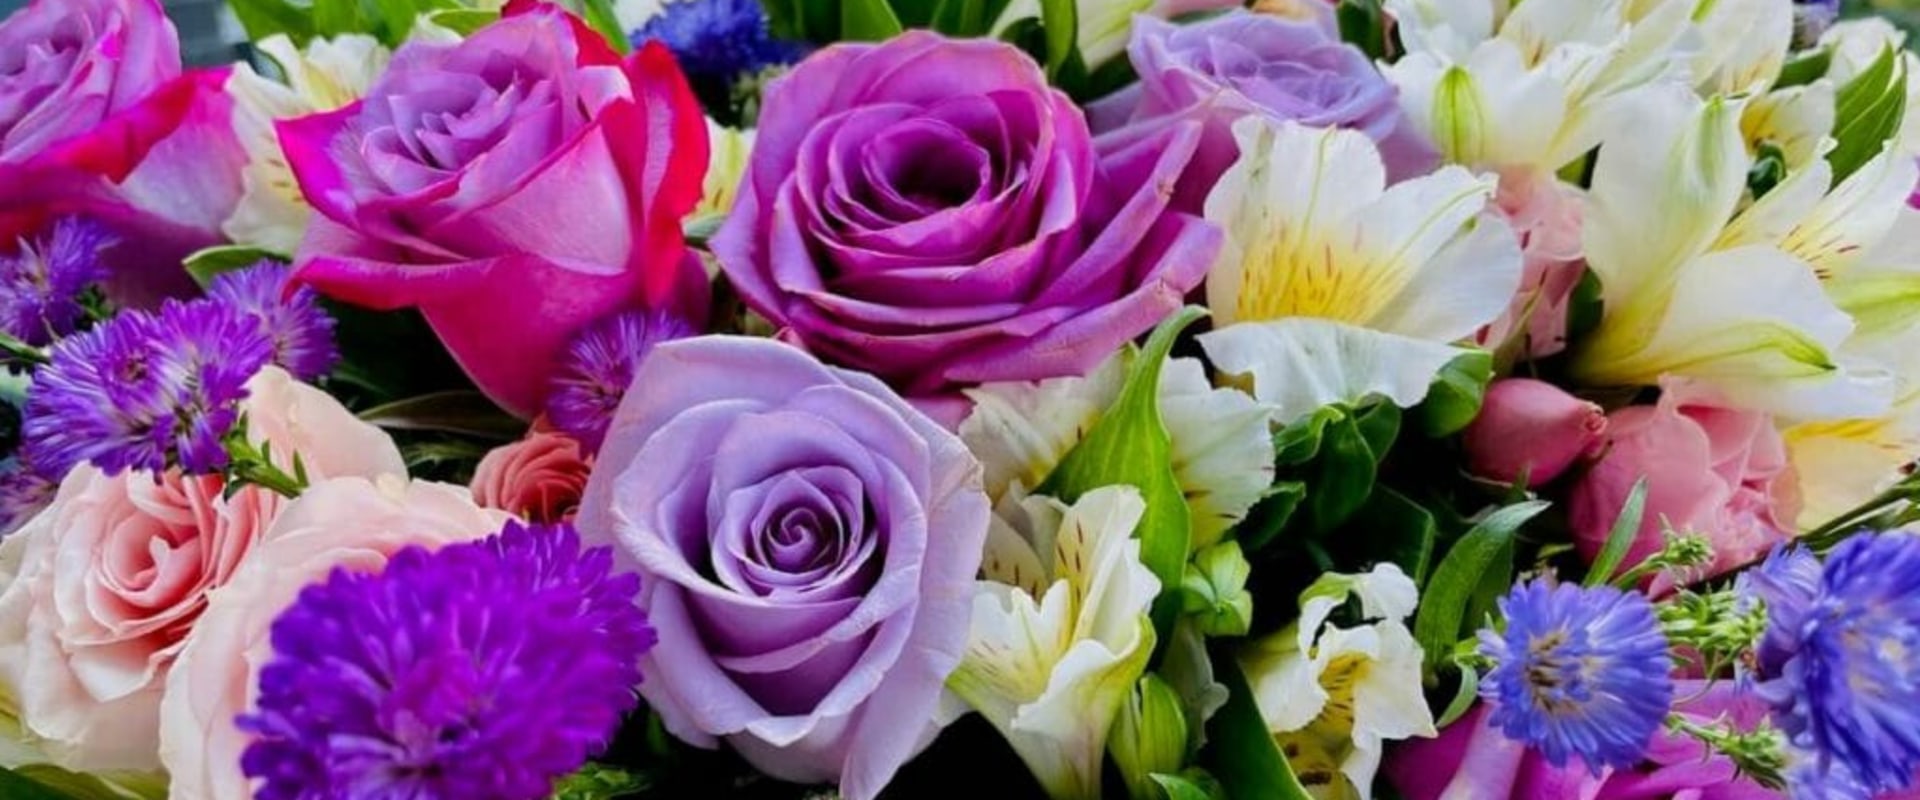 The Best Florists in Oklahoma City: A Guide to the Top 10